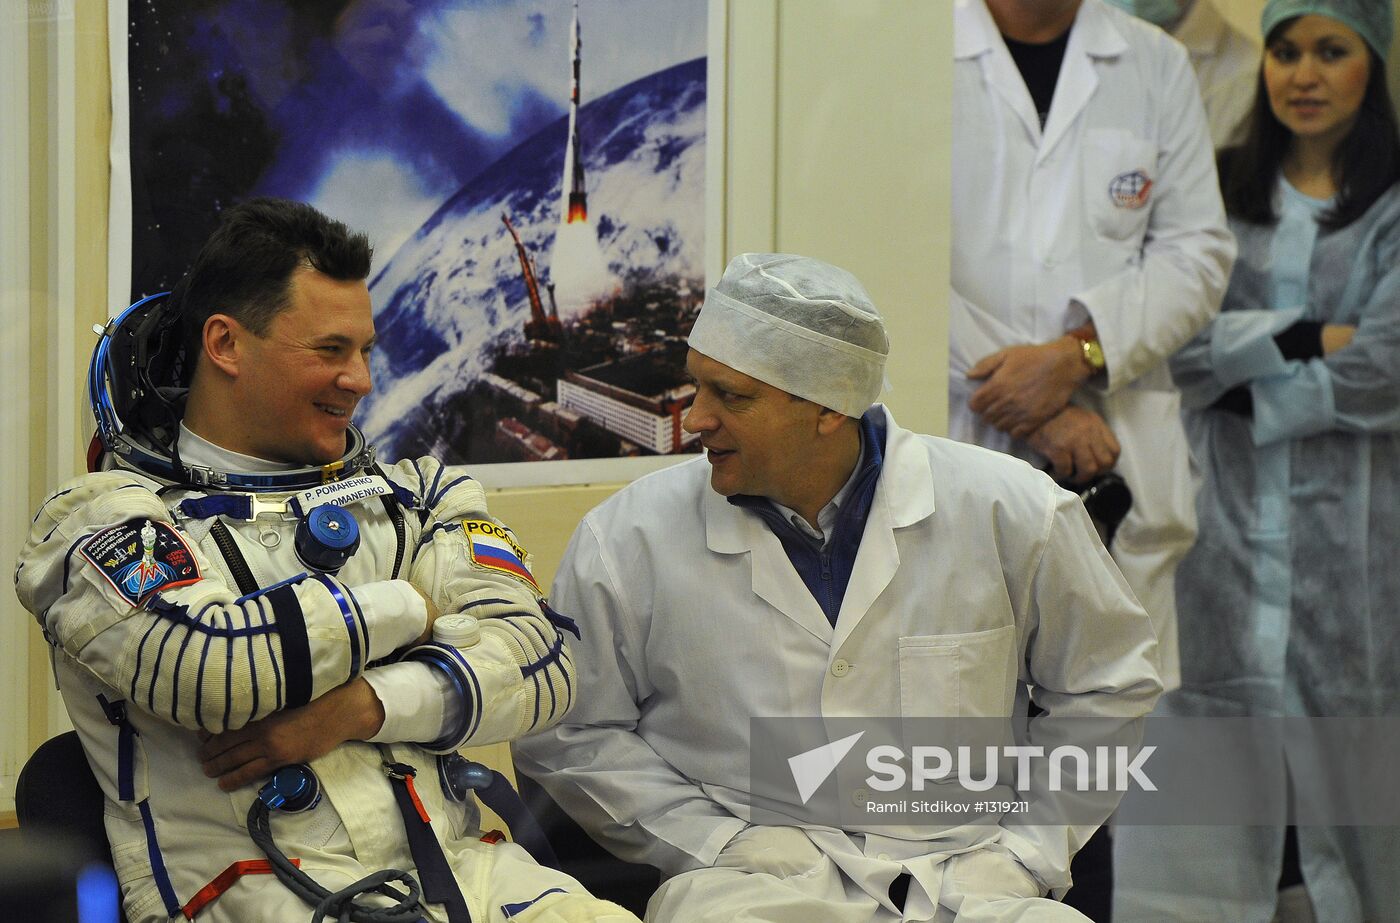 Getting ready to launch Soyuz TMA-07M manned spacecraft